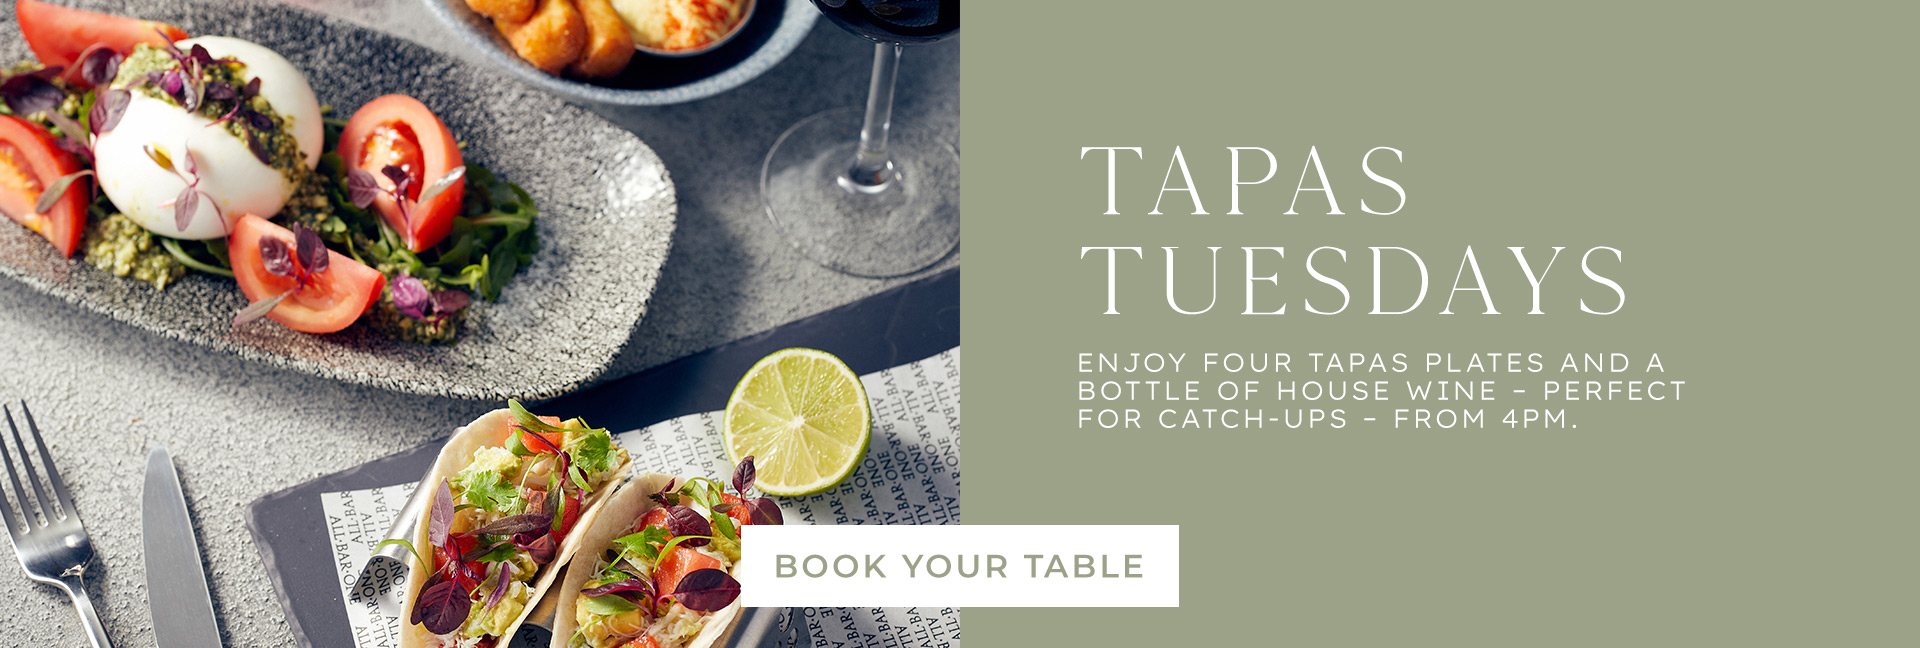 Tapas Tuesday at All Bar One Clapham Junction - Book now